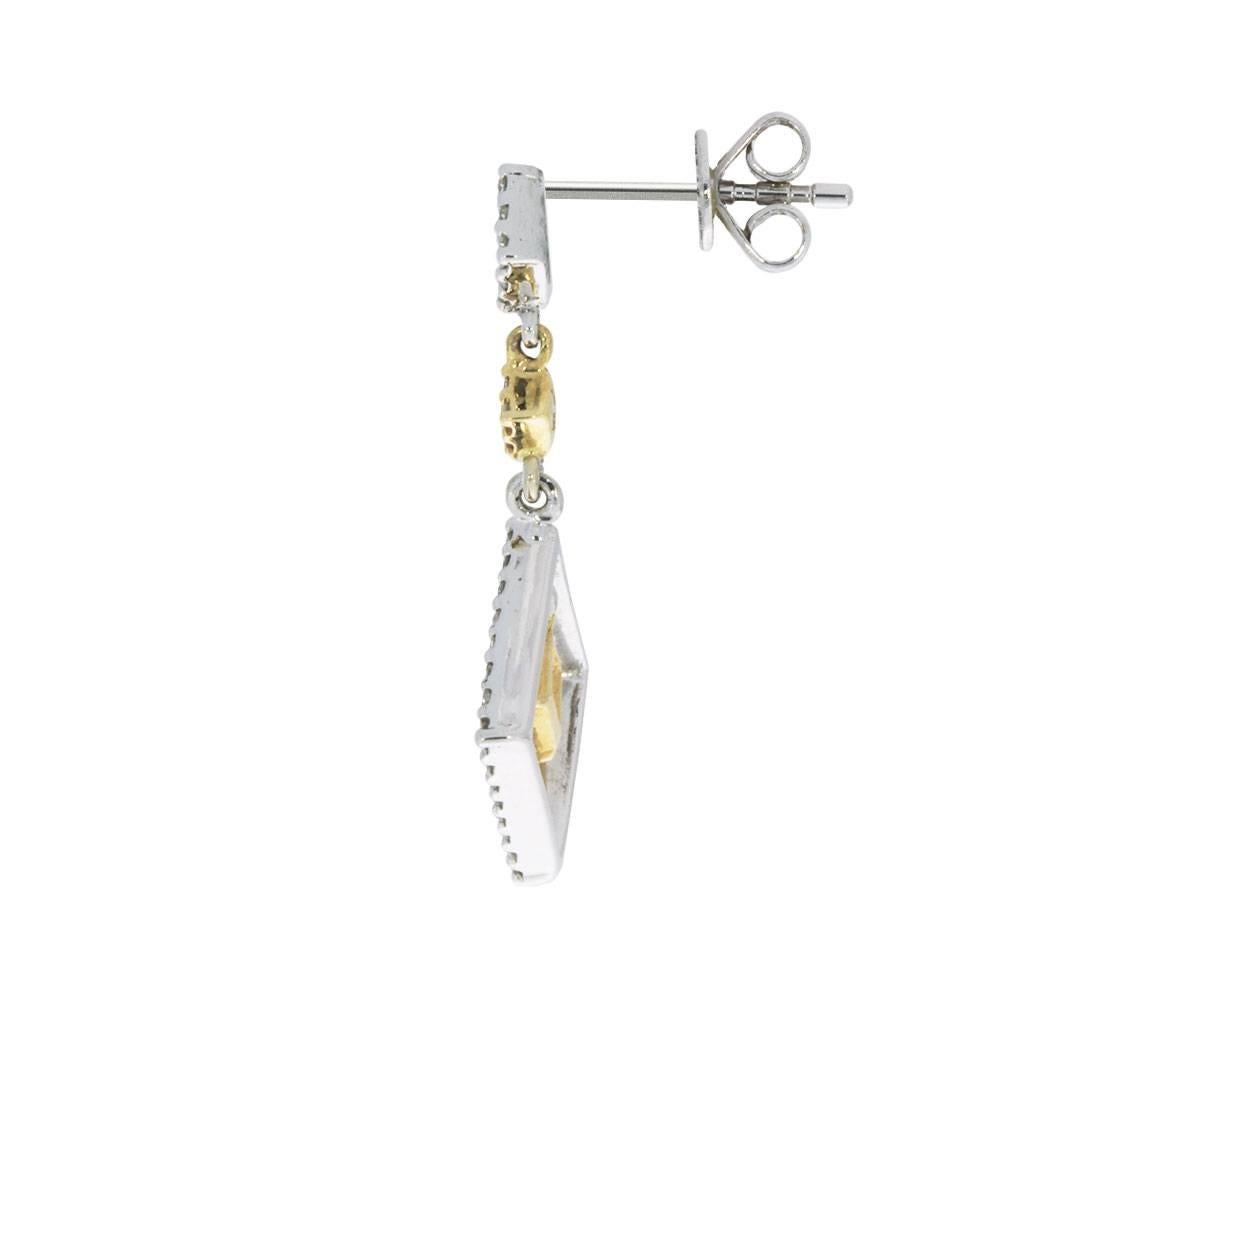 Item Details:
Estimated Retail - $2,000.00
Metal - 14 Karat White & Yellow Gold
Total Carat Weight (TCW) - 1.00 ctw
Style - Drop/Dangle Earrings
Fastening - Butterfly/Tension Backs
Length x Width - 25 X 14 mm
Beautiful Geometric Deco style design!
